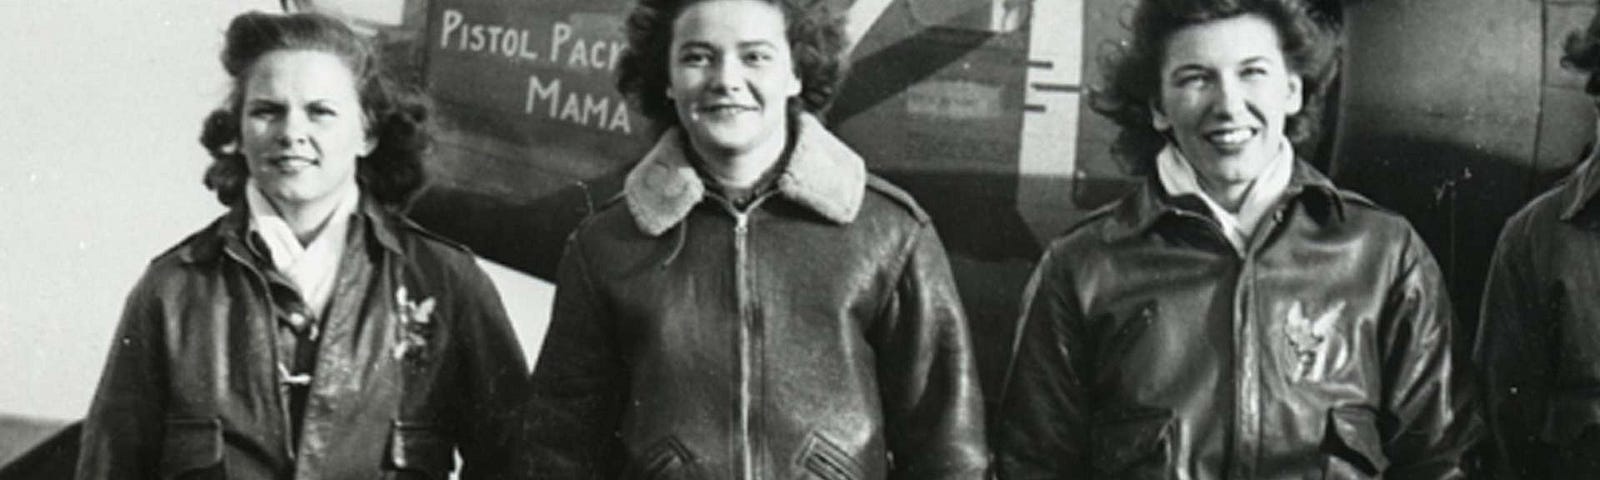 American Women in World War II: On the Home Front and Beyond| https://www.nationalww2museum.org